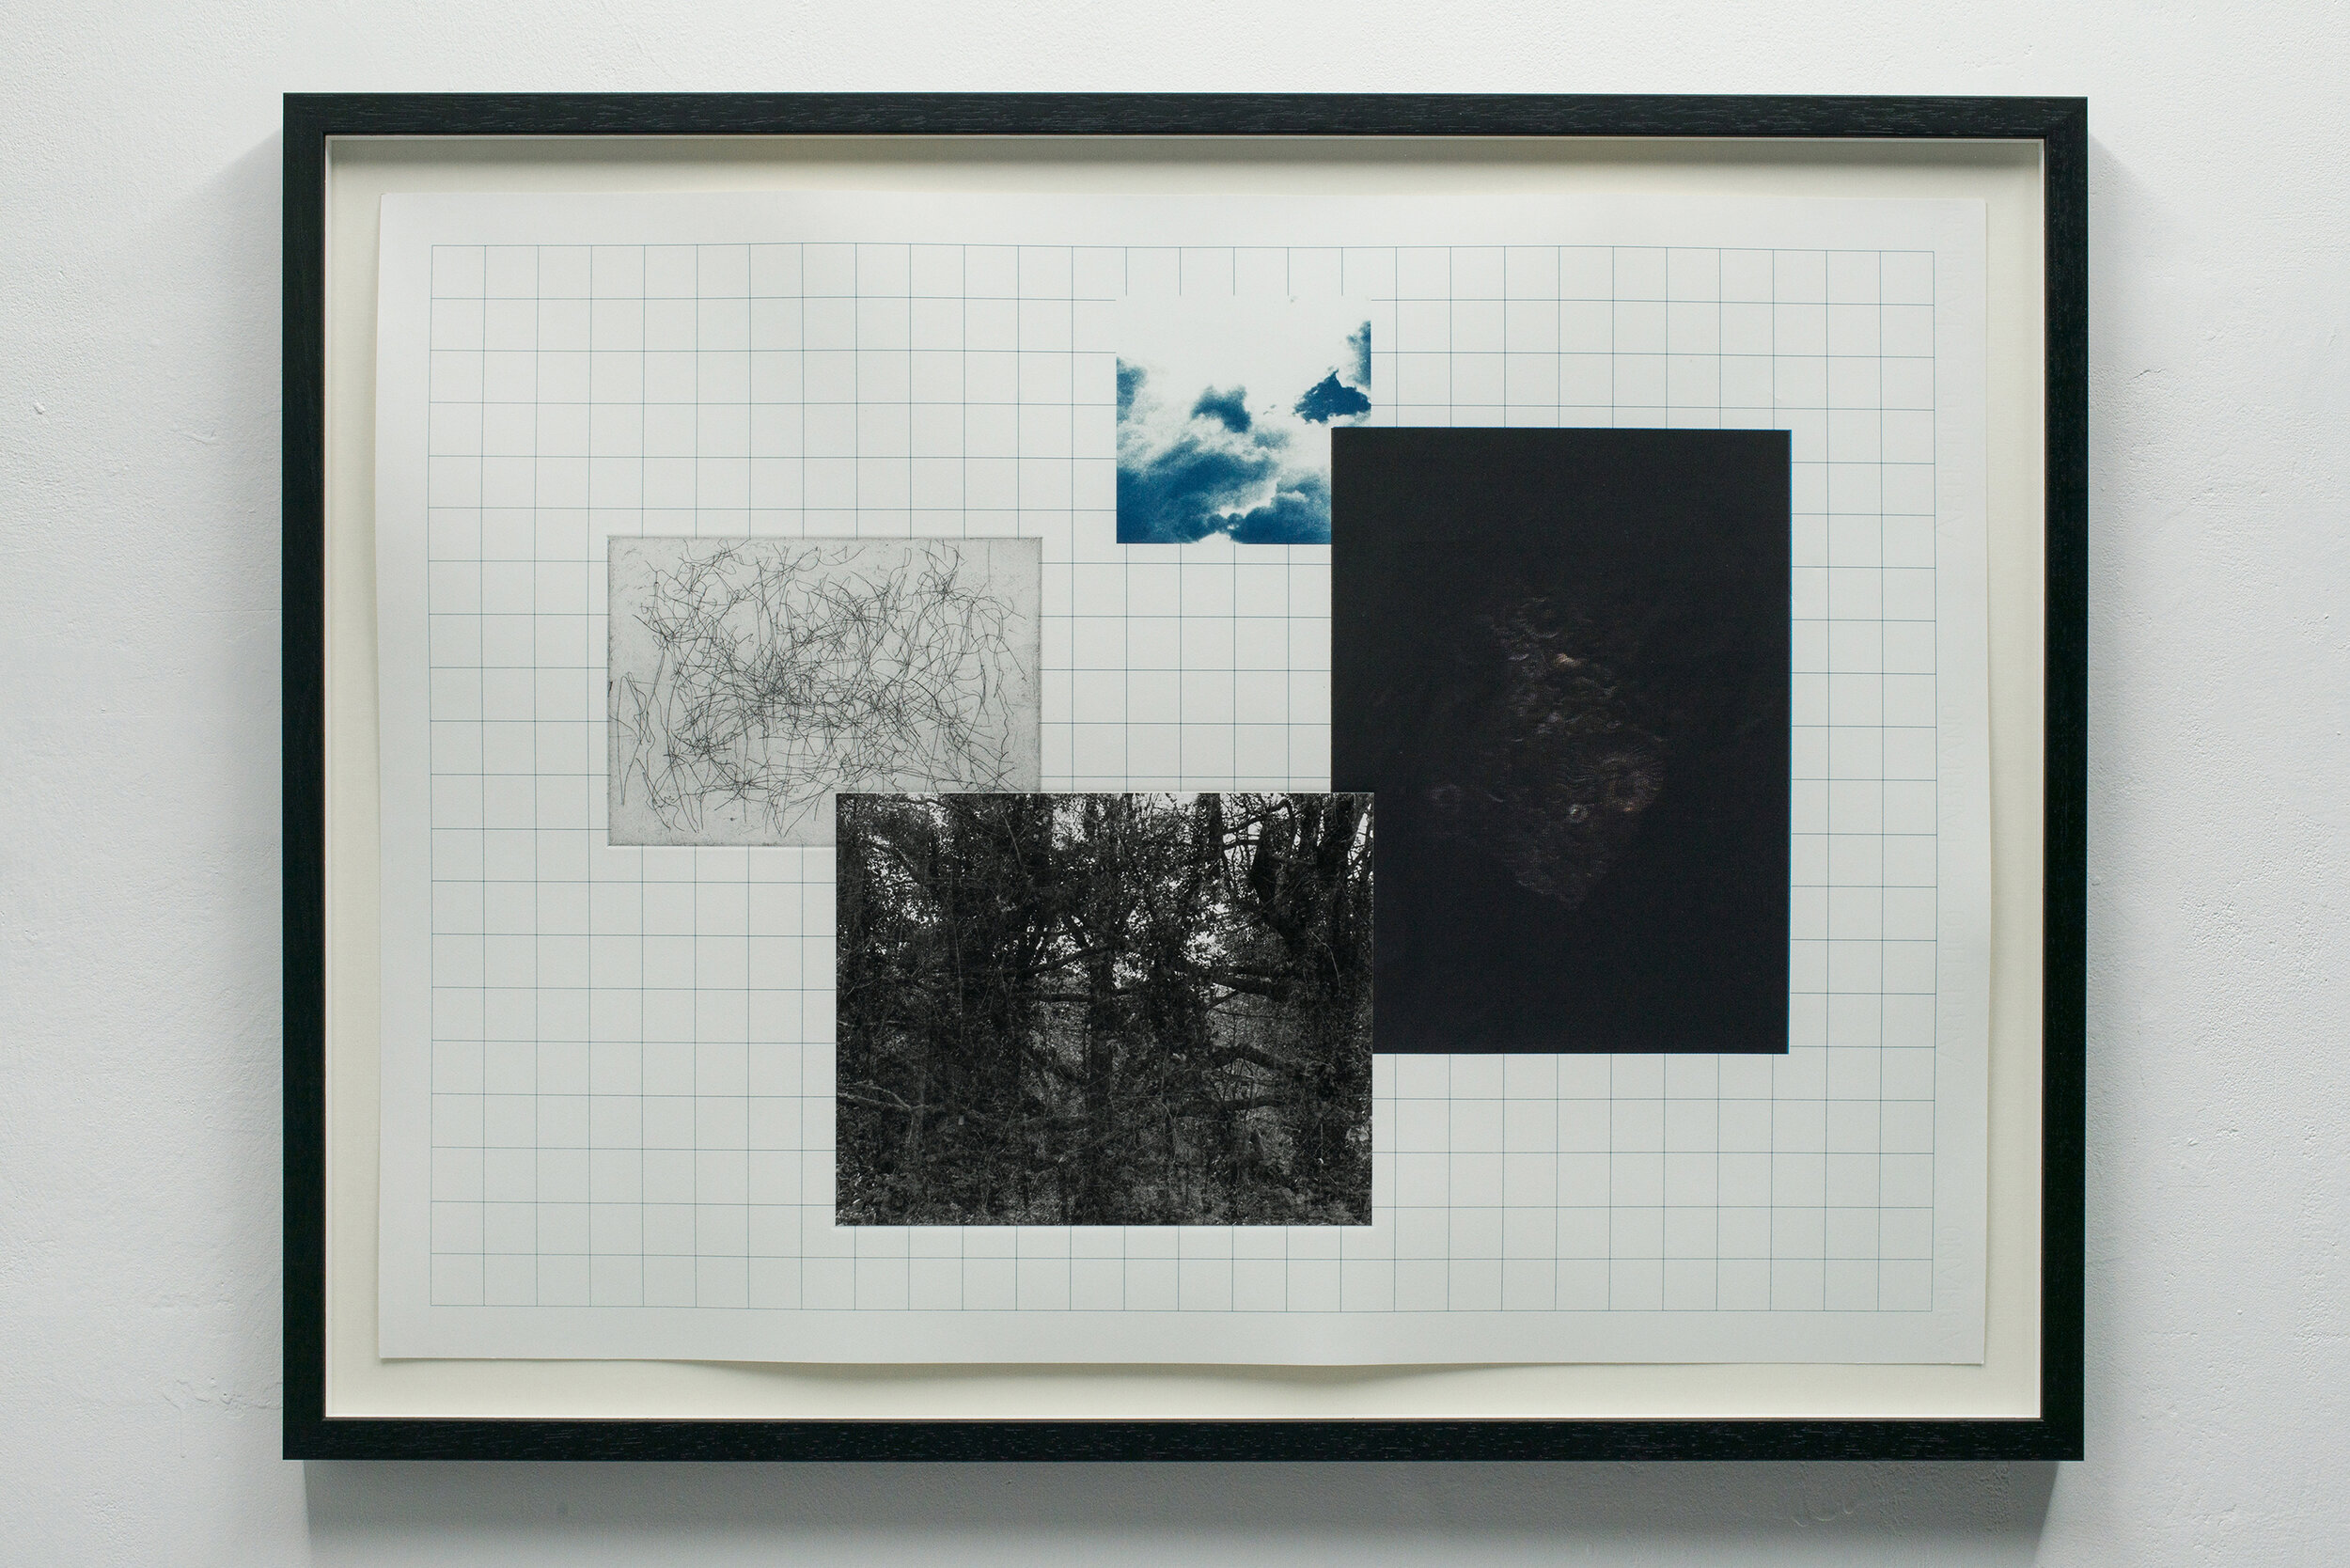   Just Another Layer of Death on Top of the Rest II , 2016, 55.5x68cm, cyanotype, silk screen print, hard-ground etching, and silver gelatine photograph 